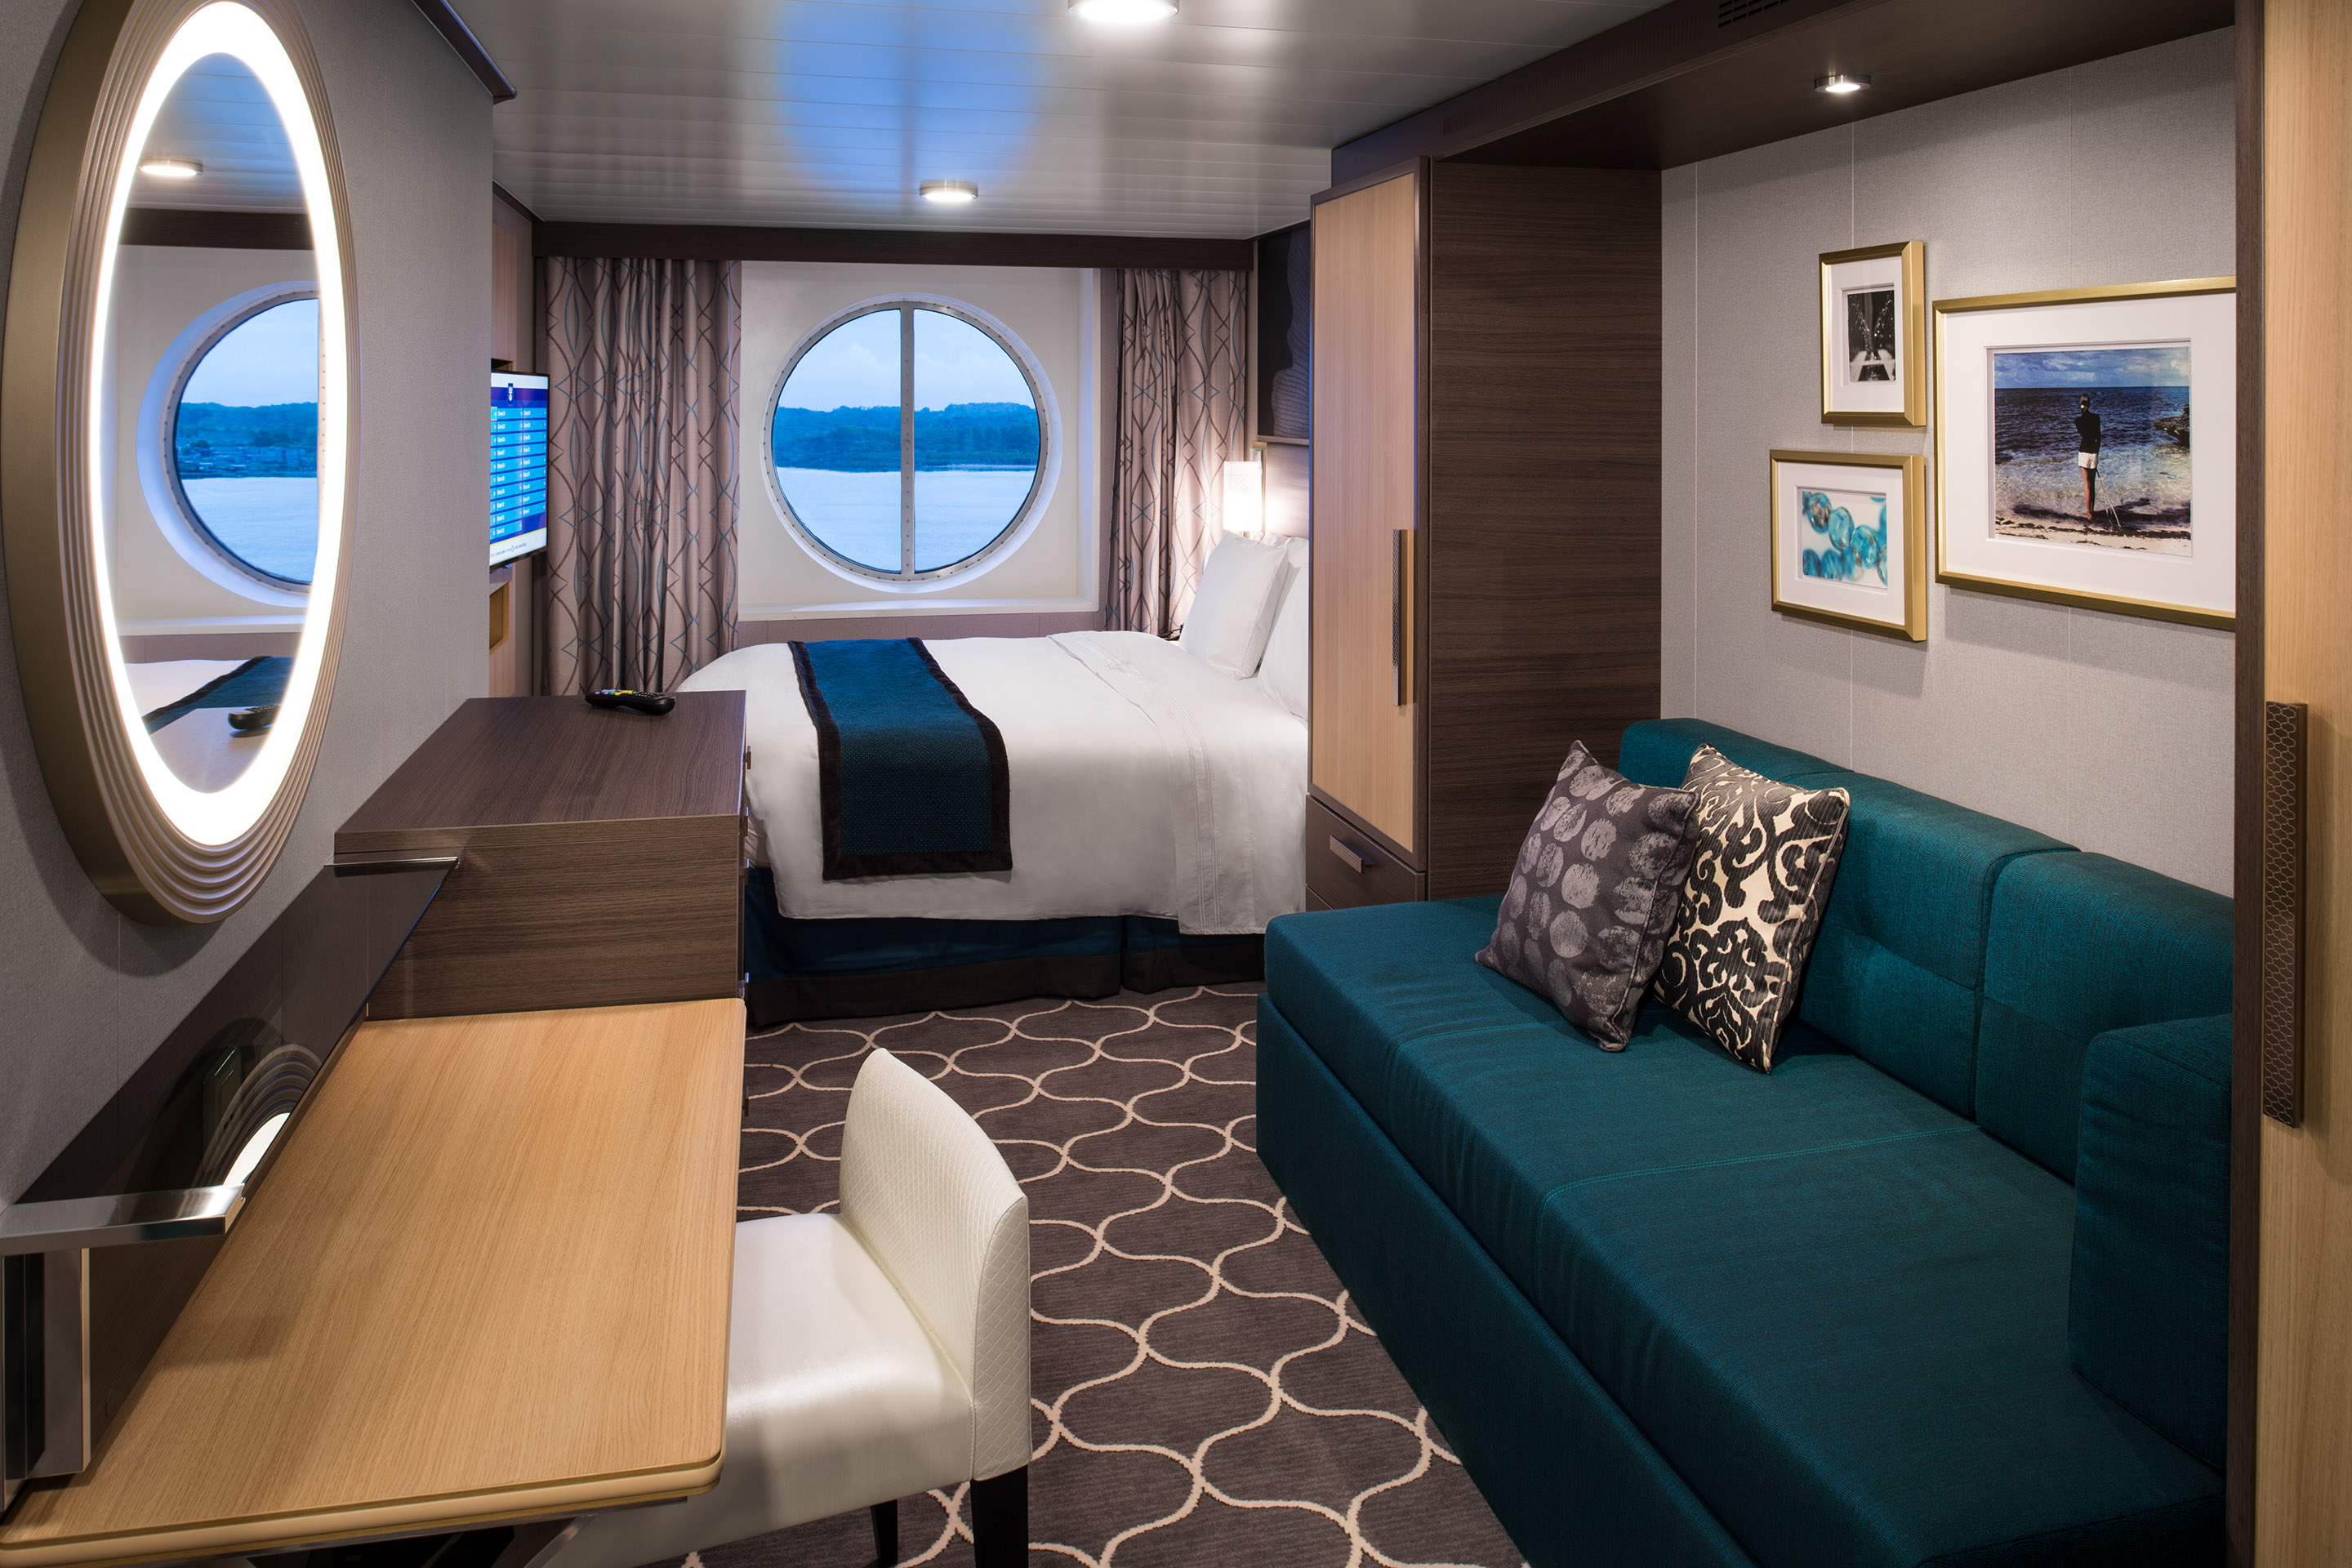 Image of Ocean View Cabin, sourced from: Royal Caribbean International https://www.royalcaribbean.com/content/dam/royal/accommodations/harmony/harmony-of-the-seas-oceanview-living-room.jpg